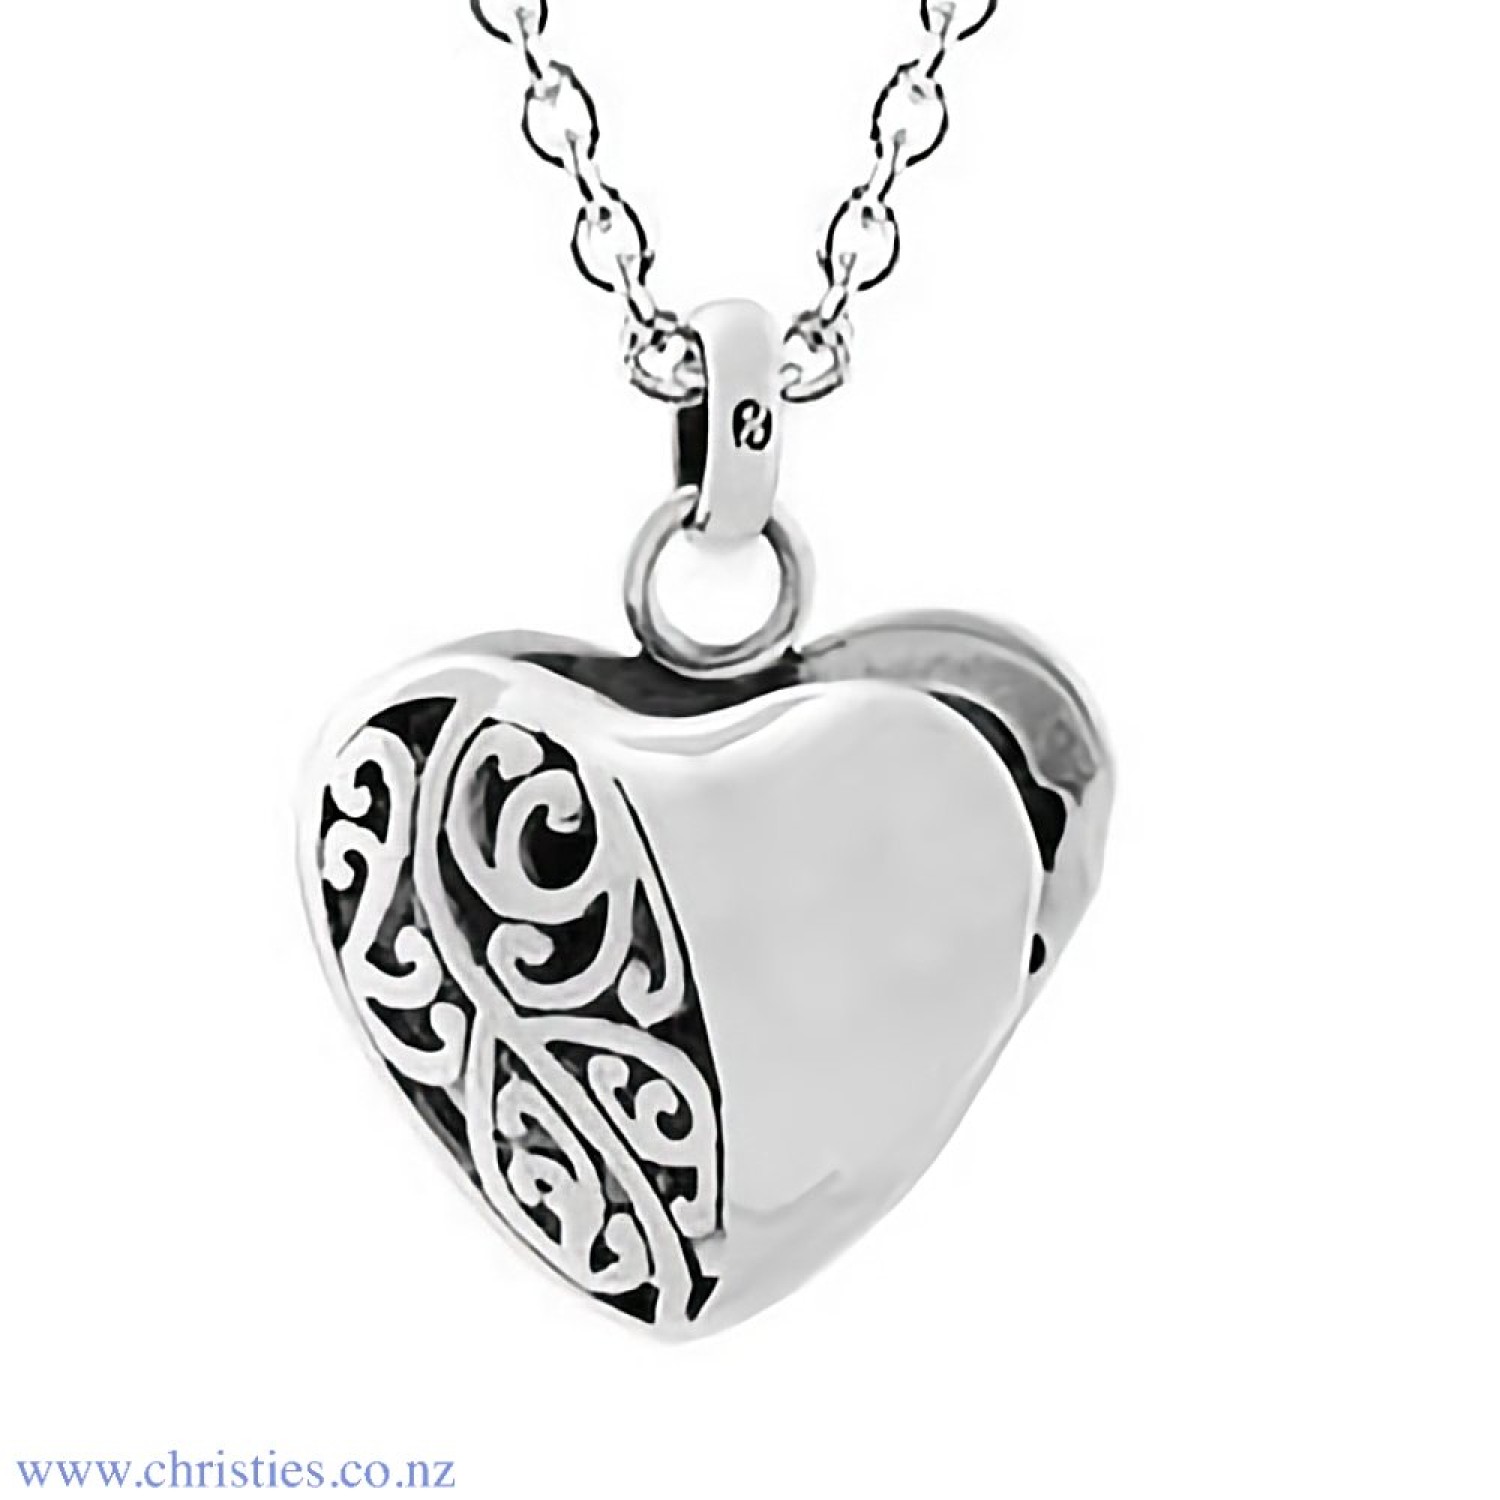 4N20008 Evolve Koru Heart Locket with Chain. Evolves delicate heart locket, adorned with a contemporary New Zealand motif, represents secret love. Open and stow a tiny photo of someone special, a note with a secret message, or something blue for your wedd